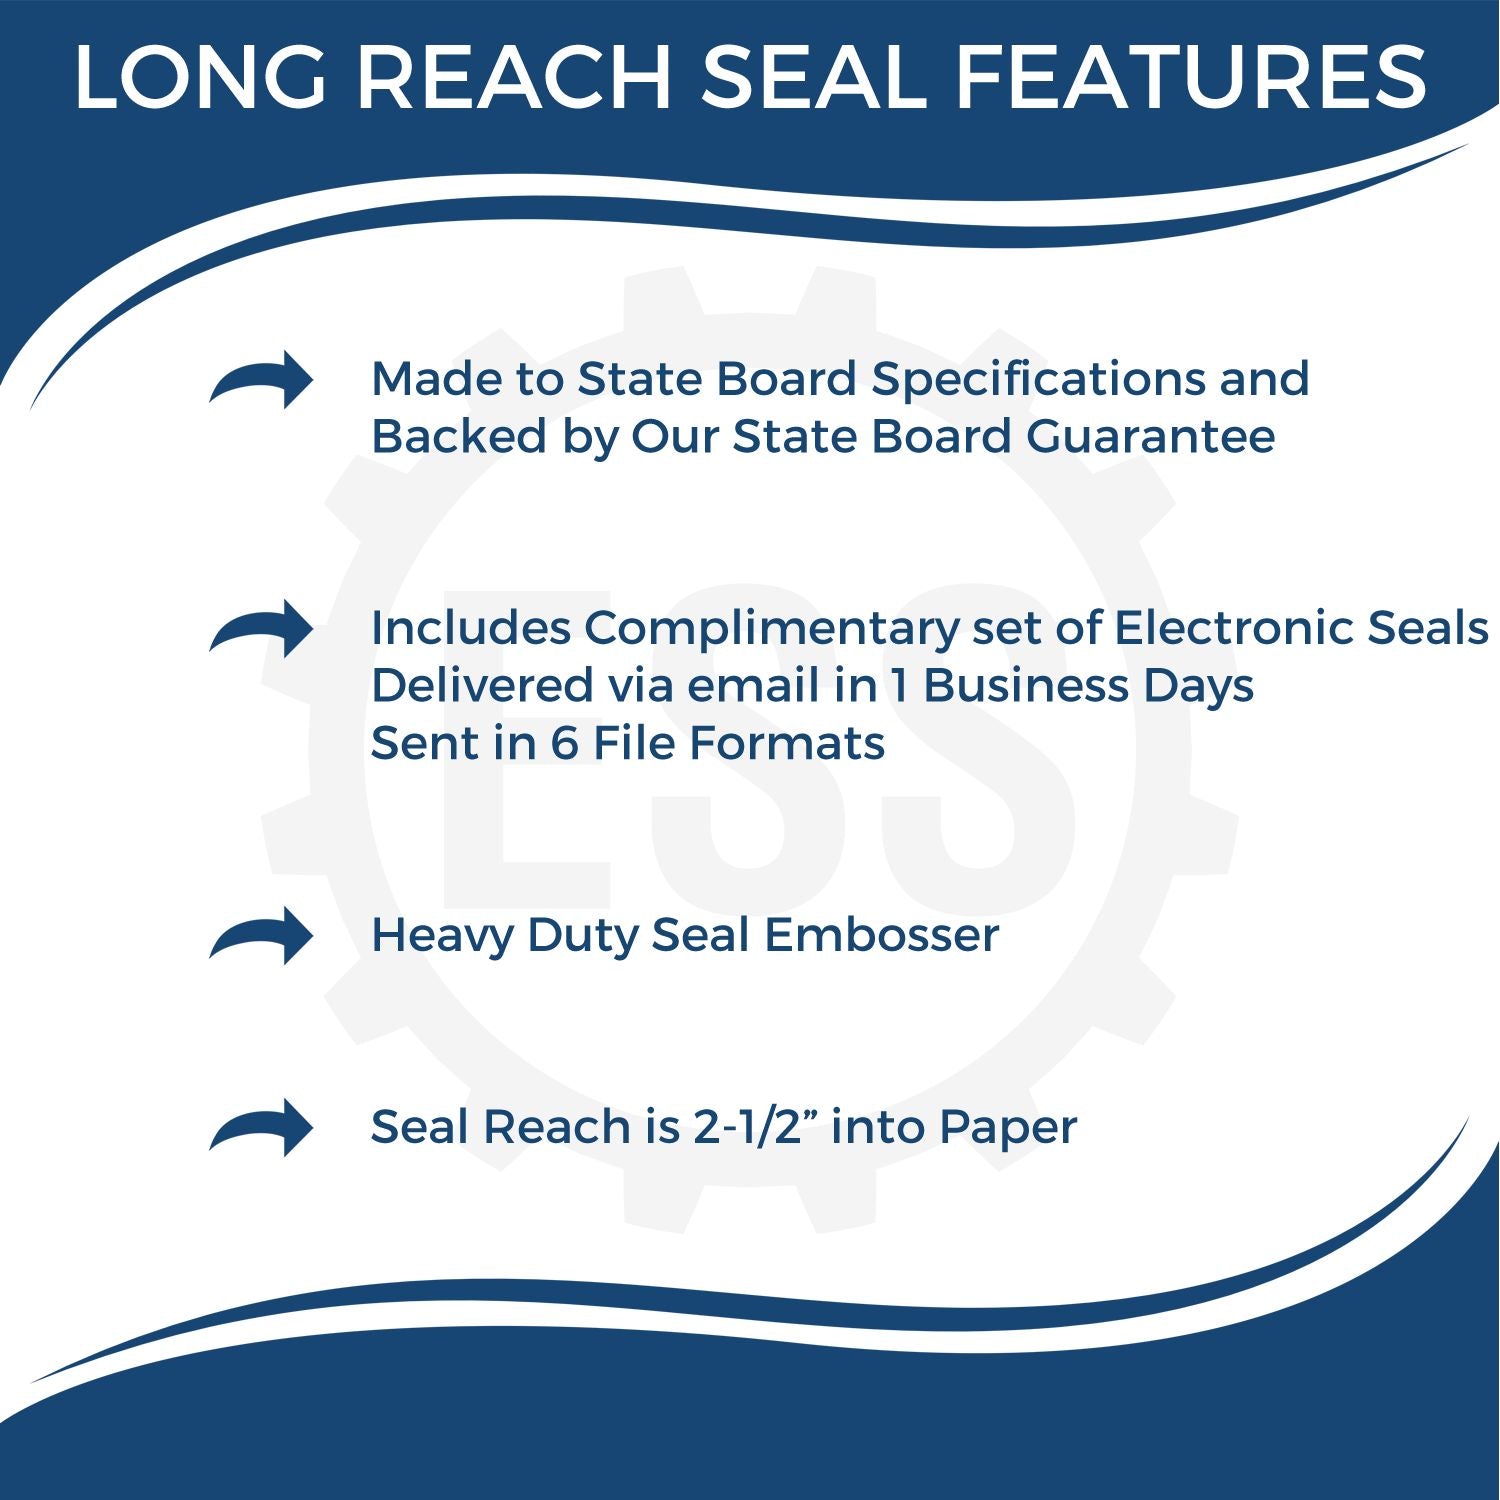 The main image for the Long Reach District of Columbia PE Seal depicting a sample of the imprint and electronic files